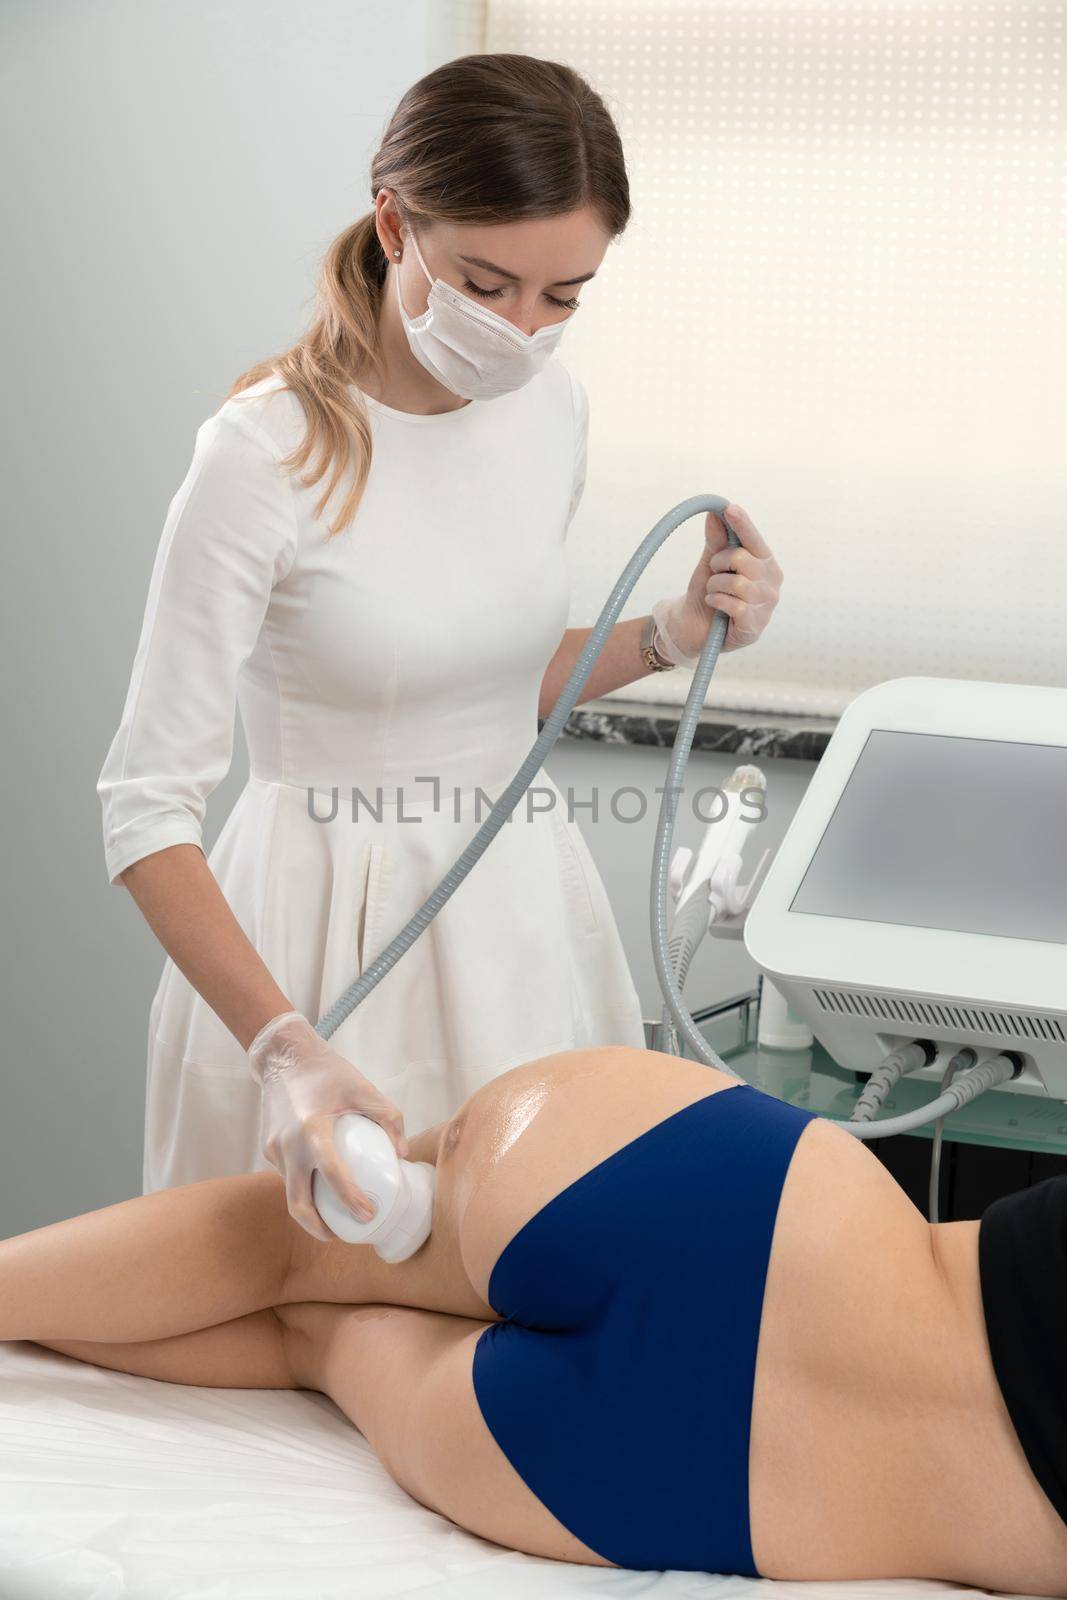 Ultrasound cavitation body contouring treatment. Woman getting anti-cellulite and anti-fat therapy in beauty salon by Mariakray